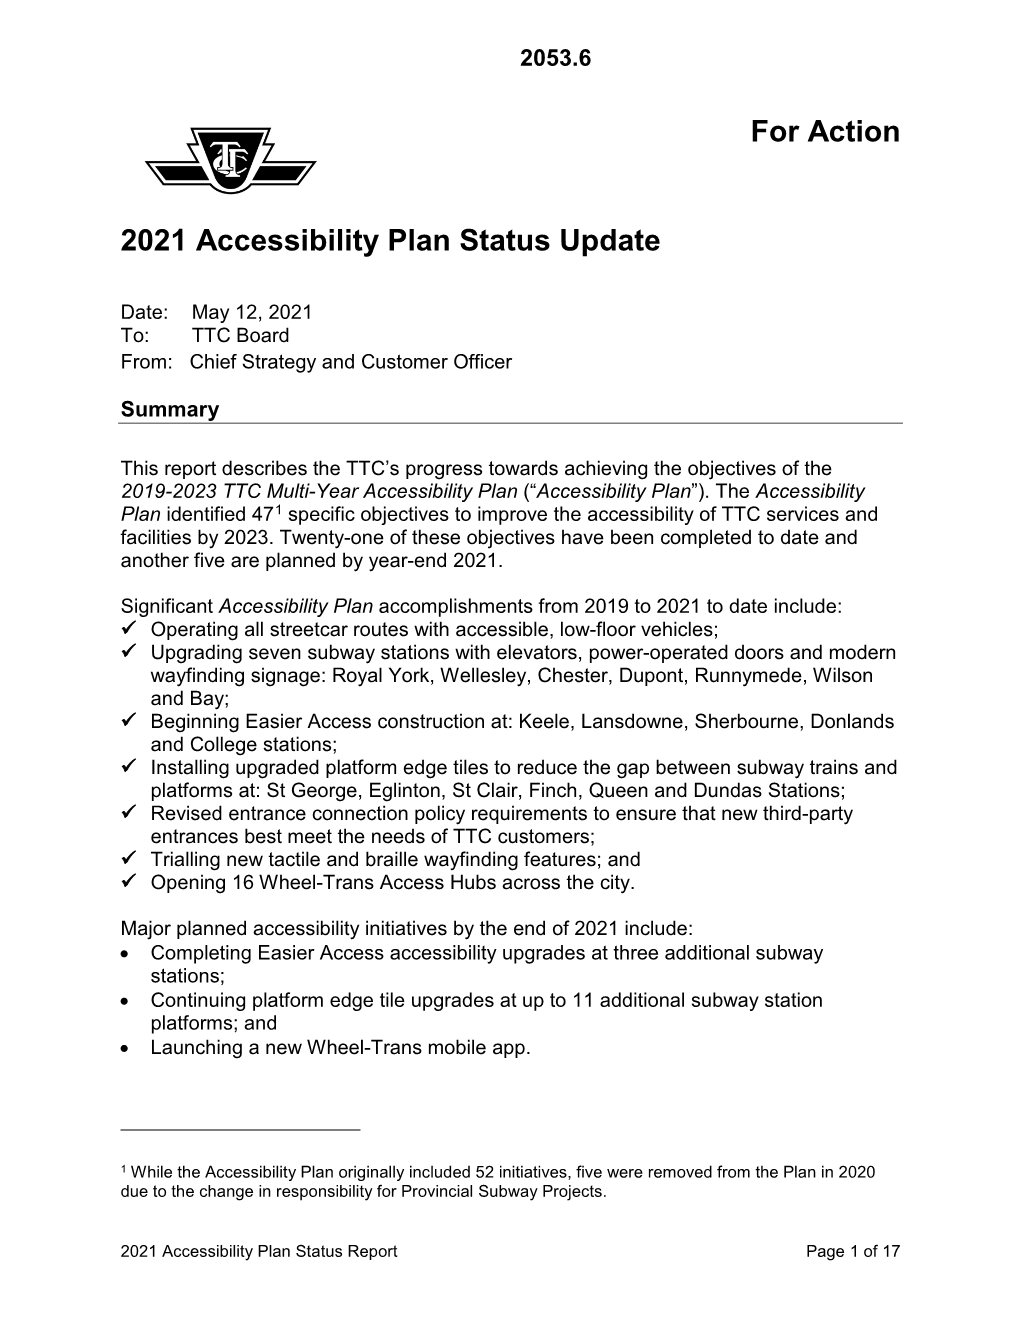 For Action 2021 Accessibility Plan Status Update